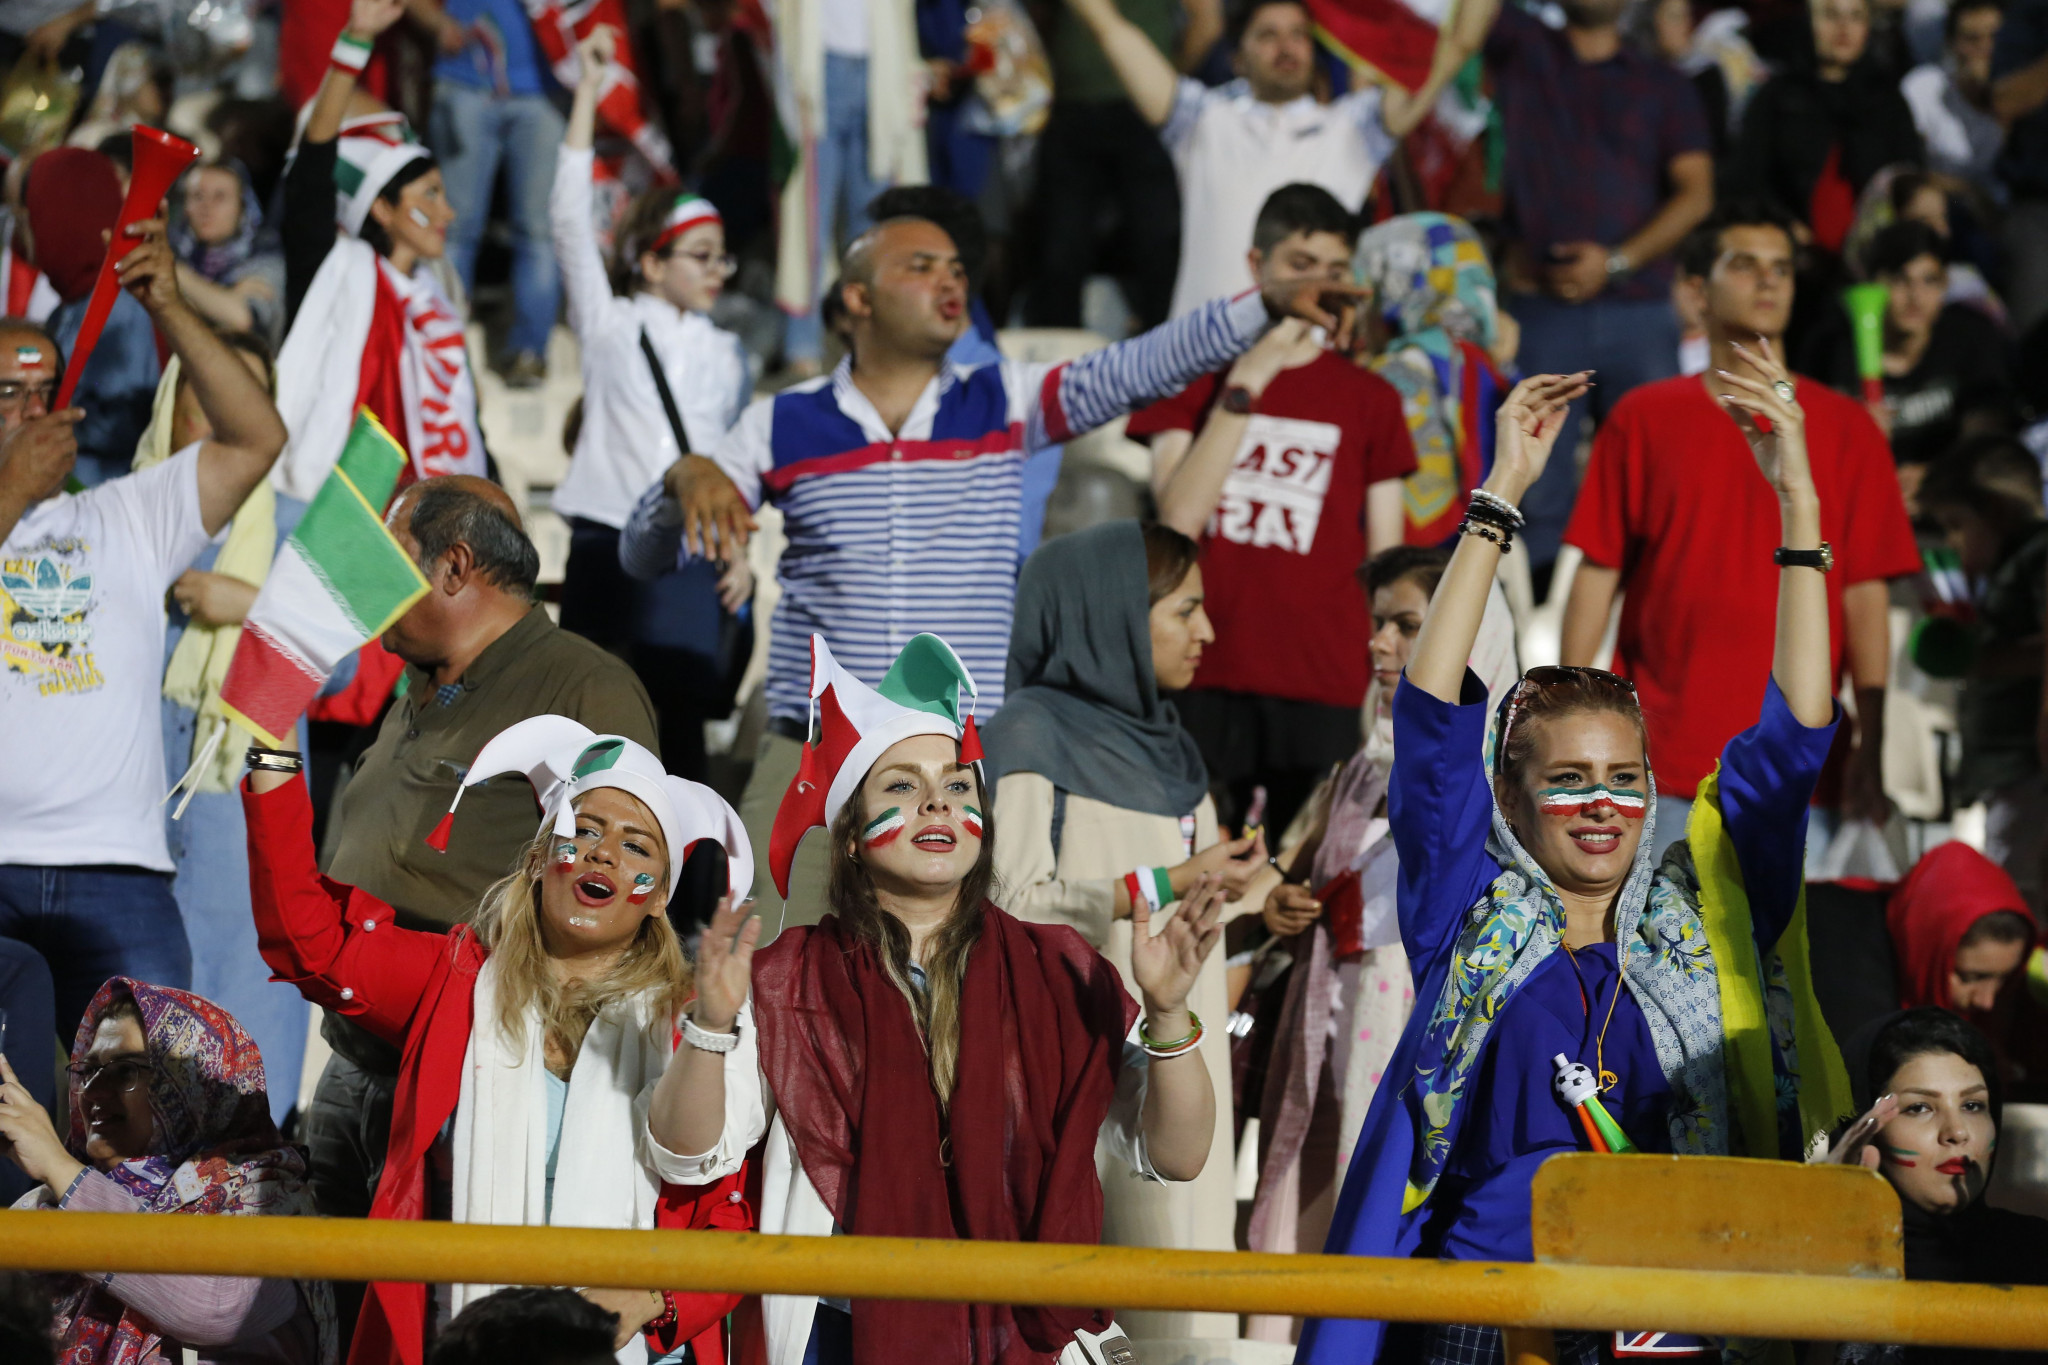 Human Rights Watch call for more action after women permitted to view World Cup matches in Iran